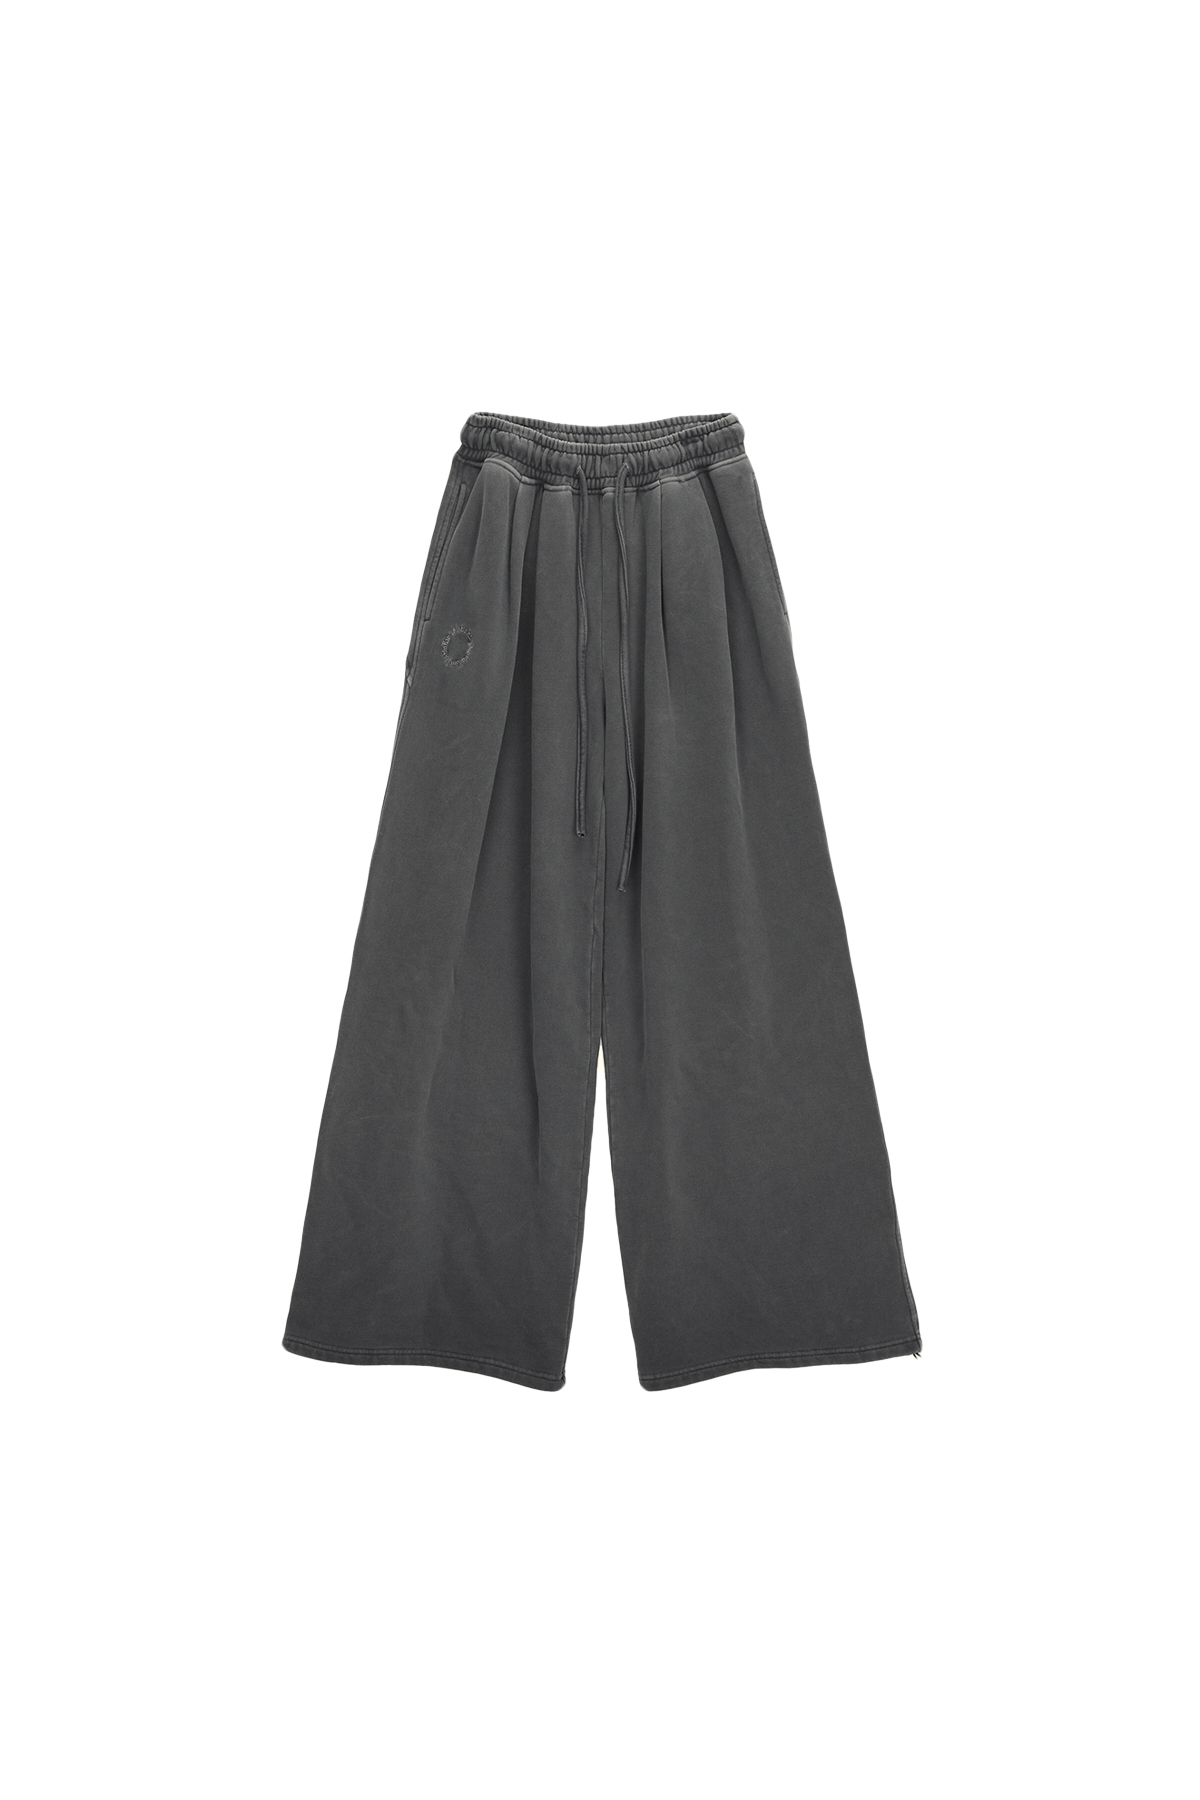 PIGMENT WIDE SWEATPANTS IN CHARCOAL